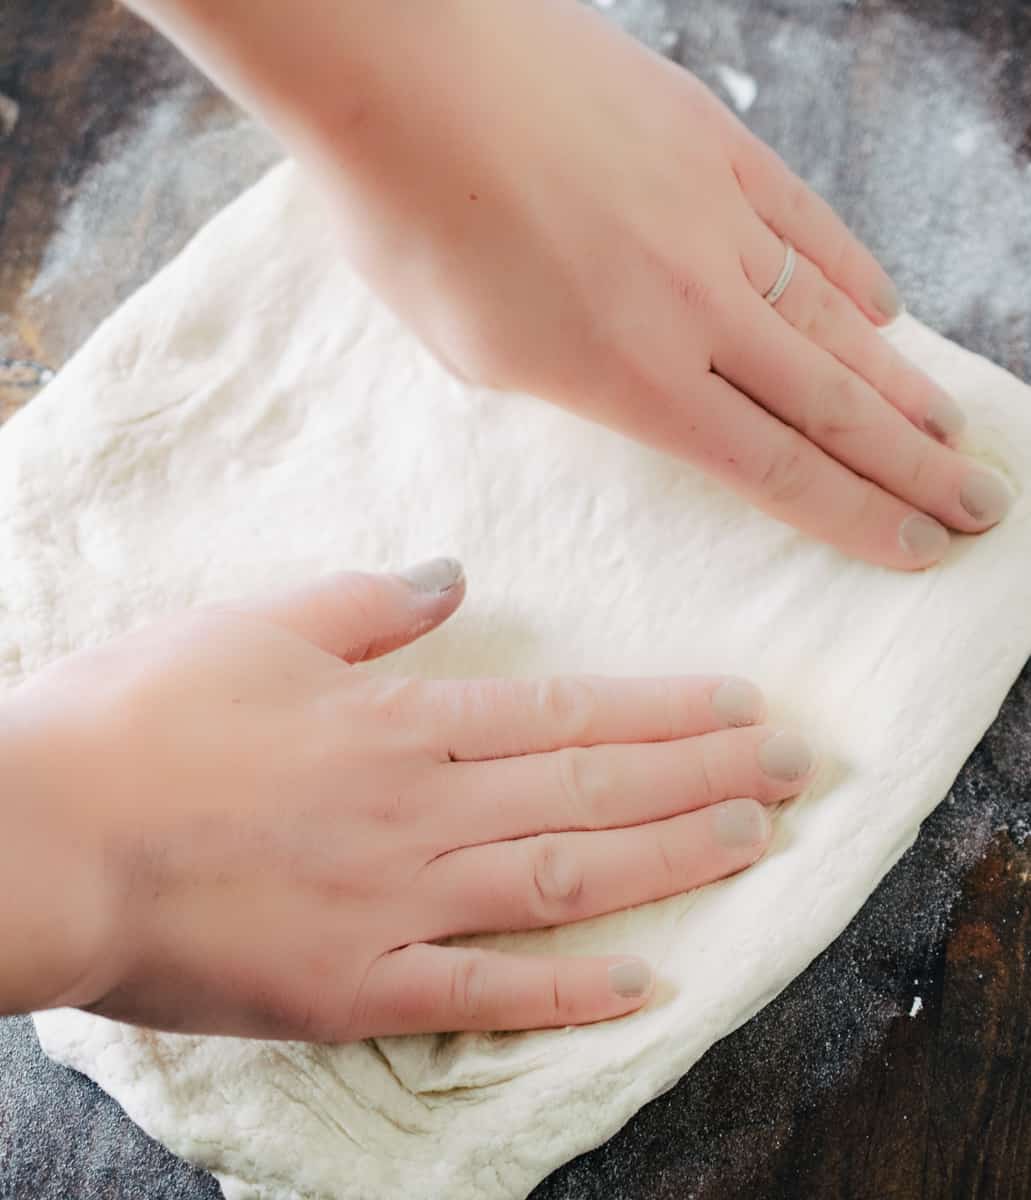 stretching pizza dough by hand on a floured surface